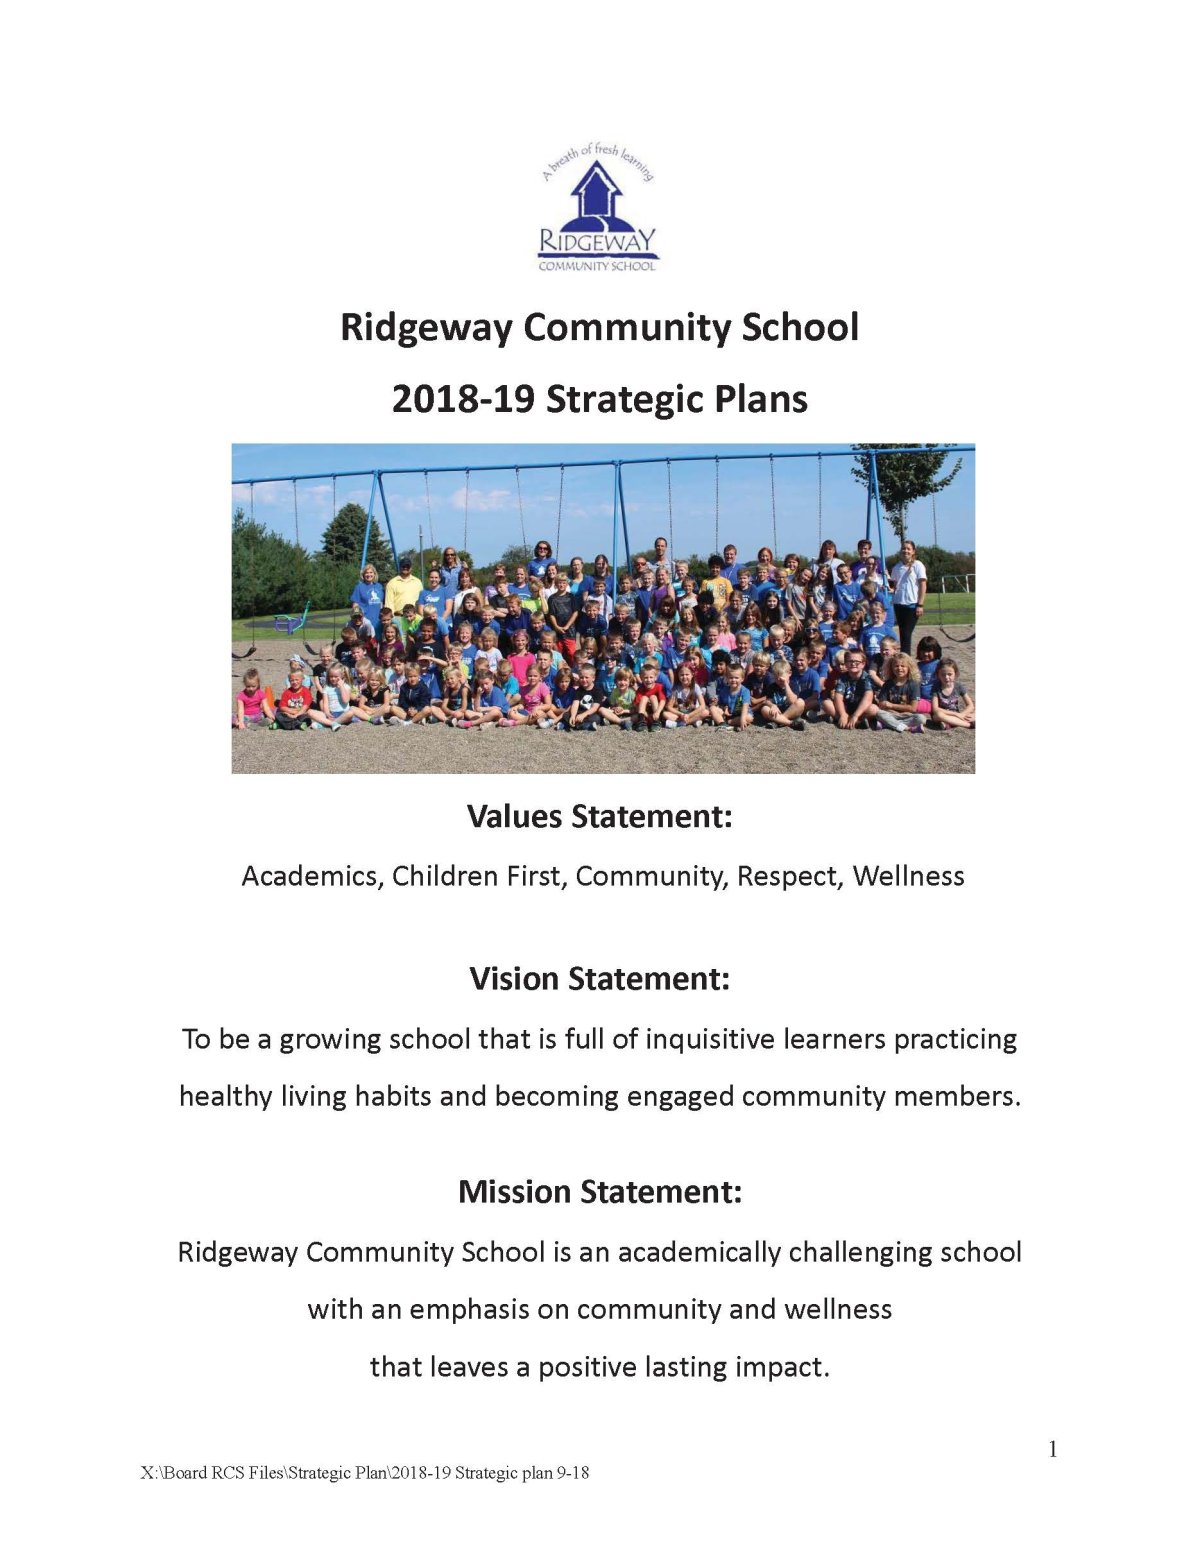 RCS 2018-19 Strategic Plan Cover Page